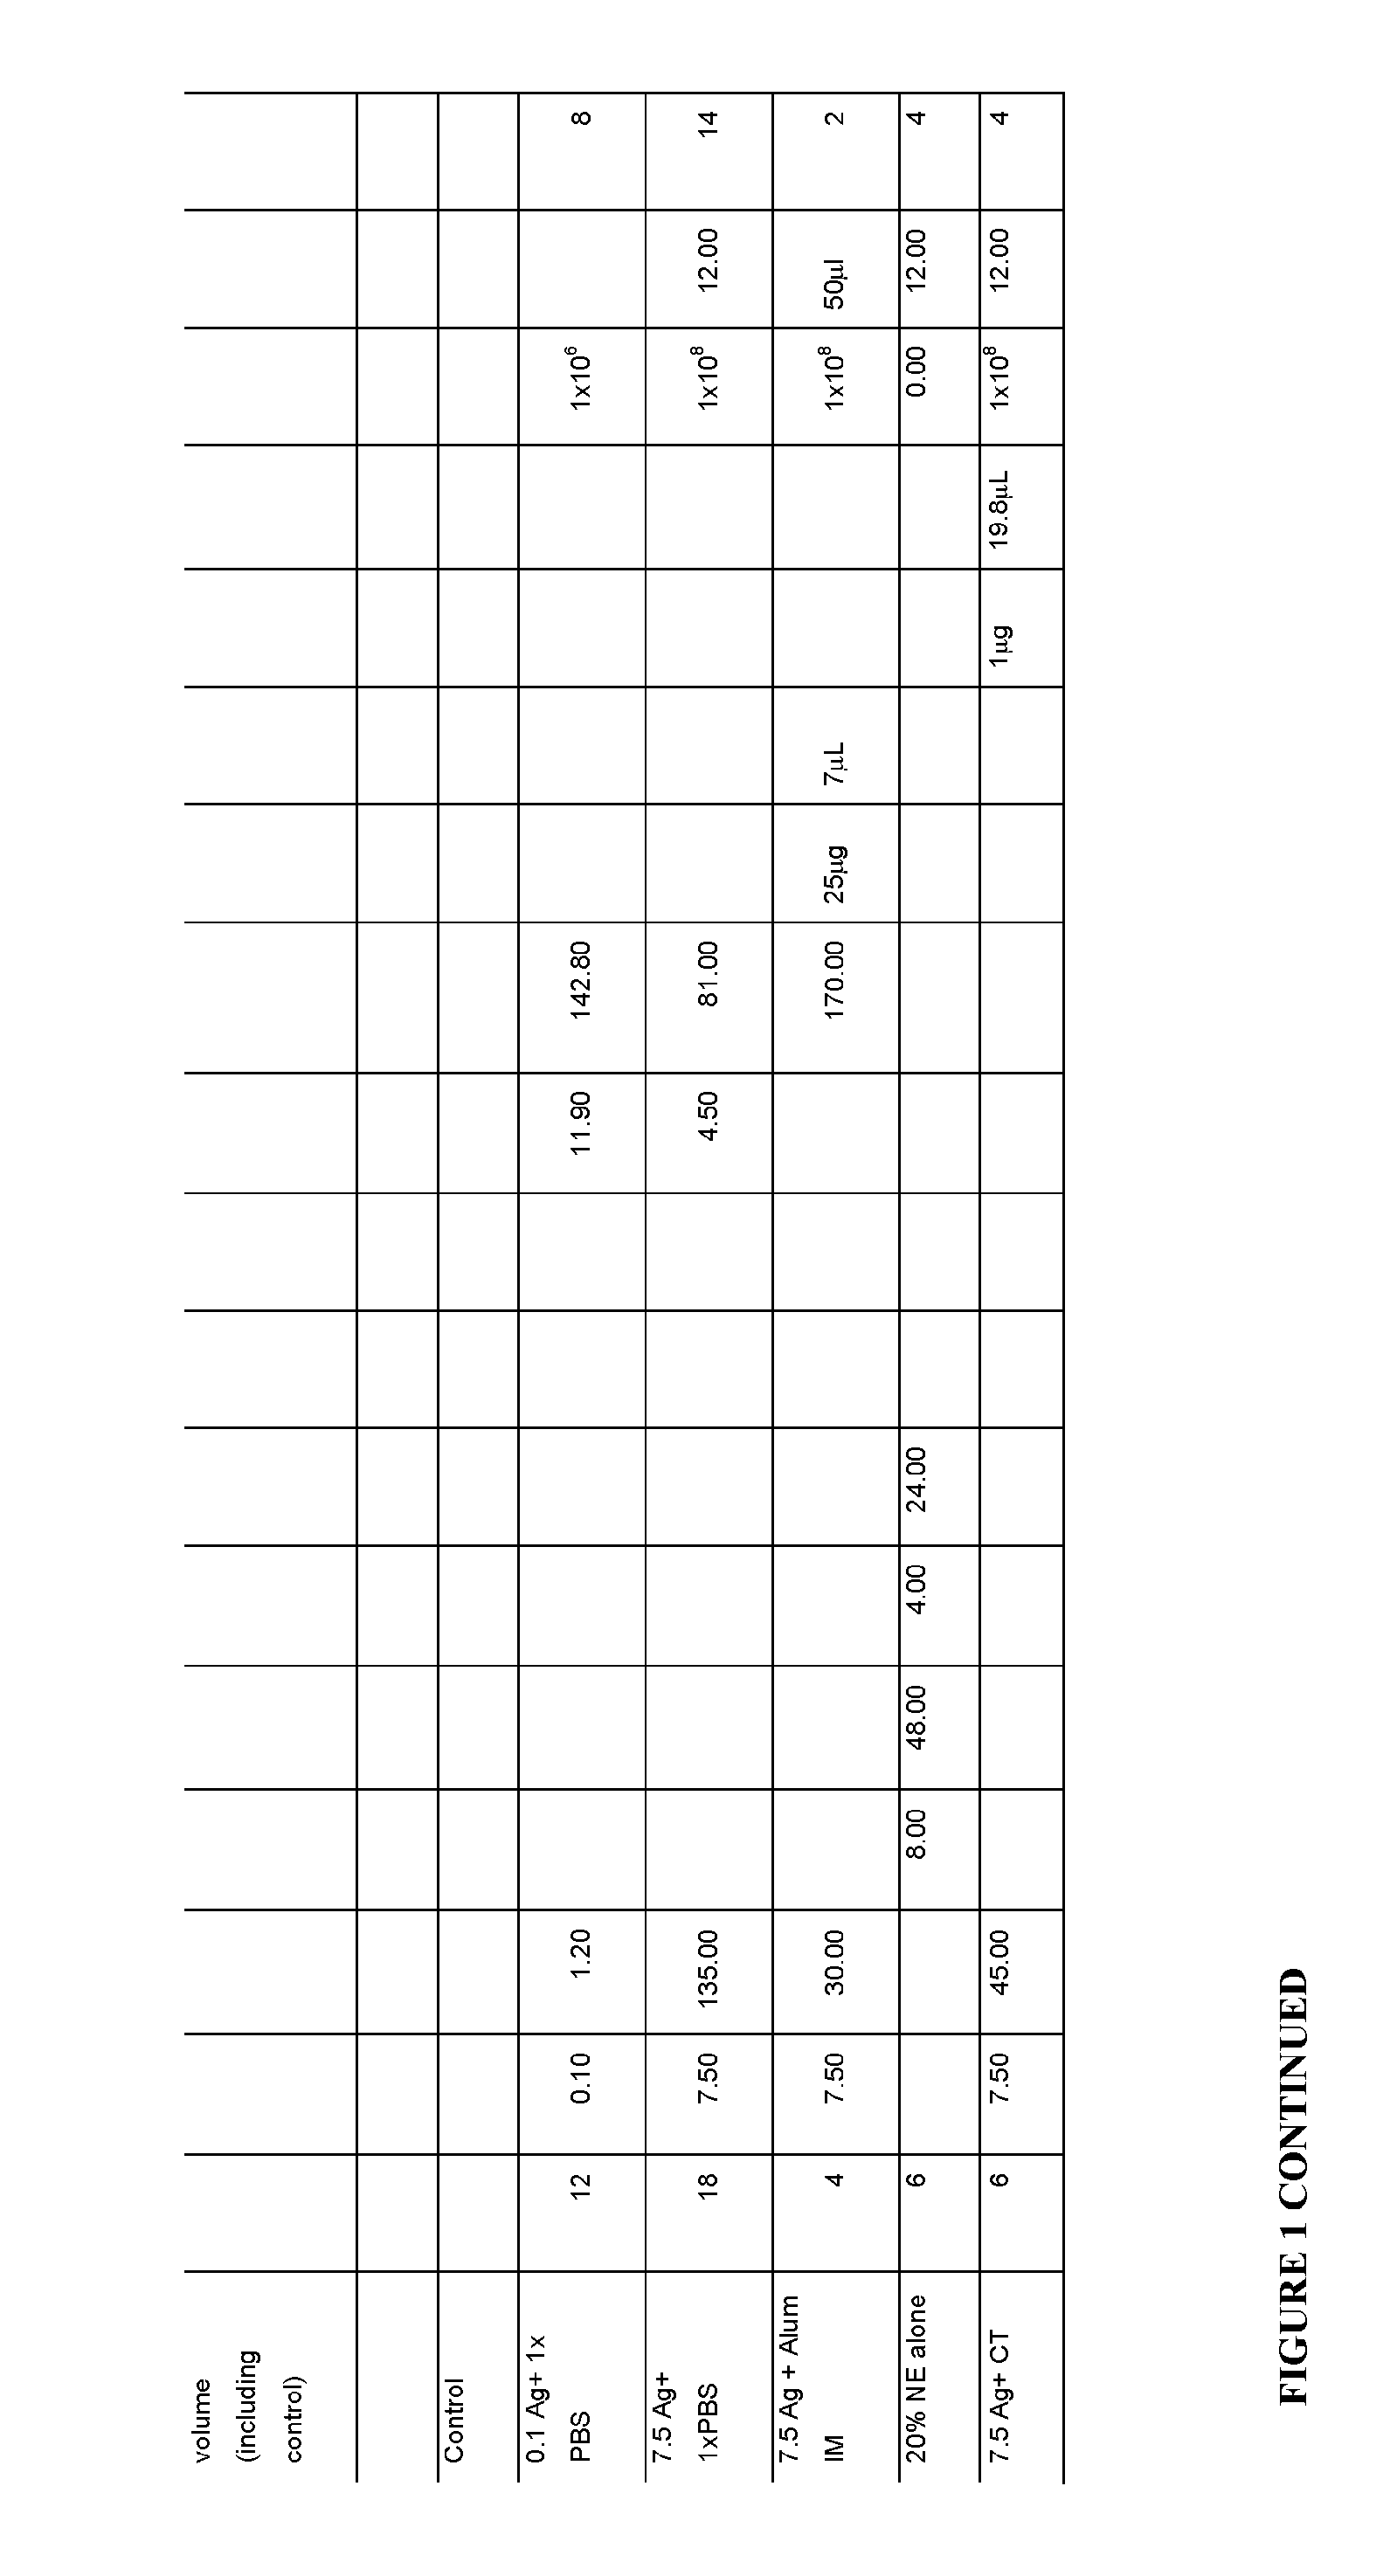 Streptococcus vaccine compositions and methods of using the same